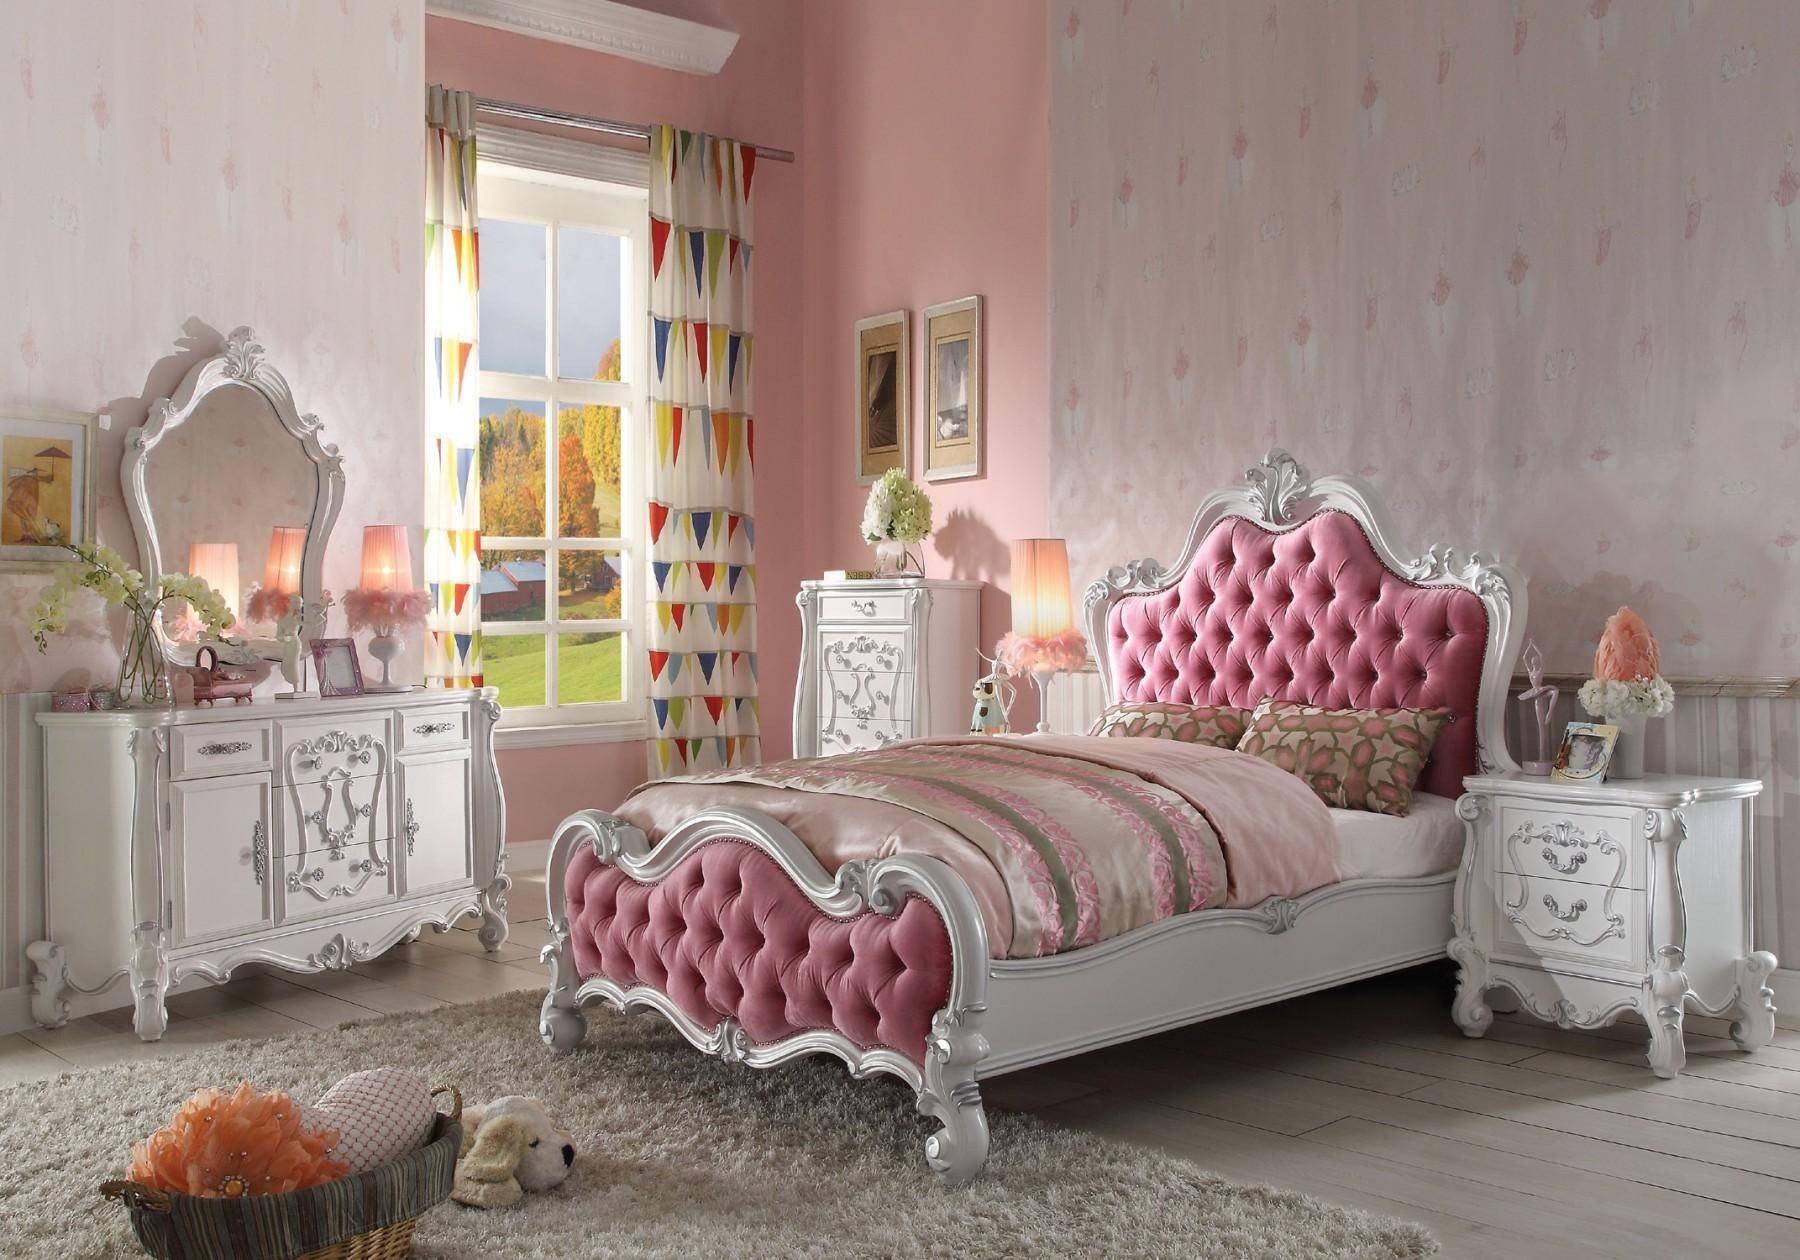 White and Silver Bedroom Set Best Of soflex Classic andria Kids Queen Bedroom Set 4pcs Antique